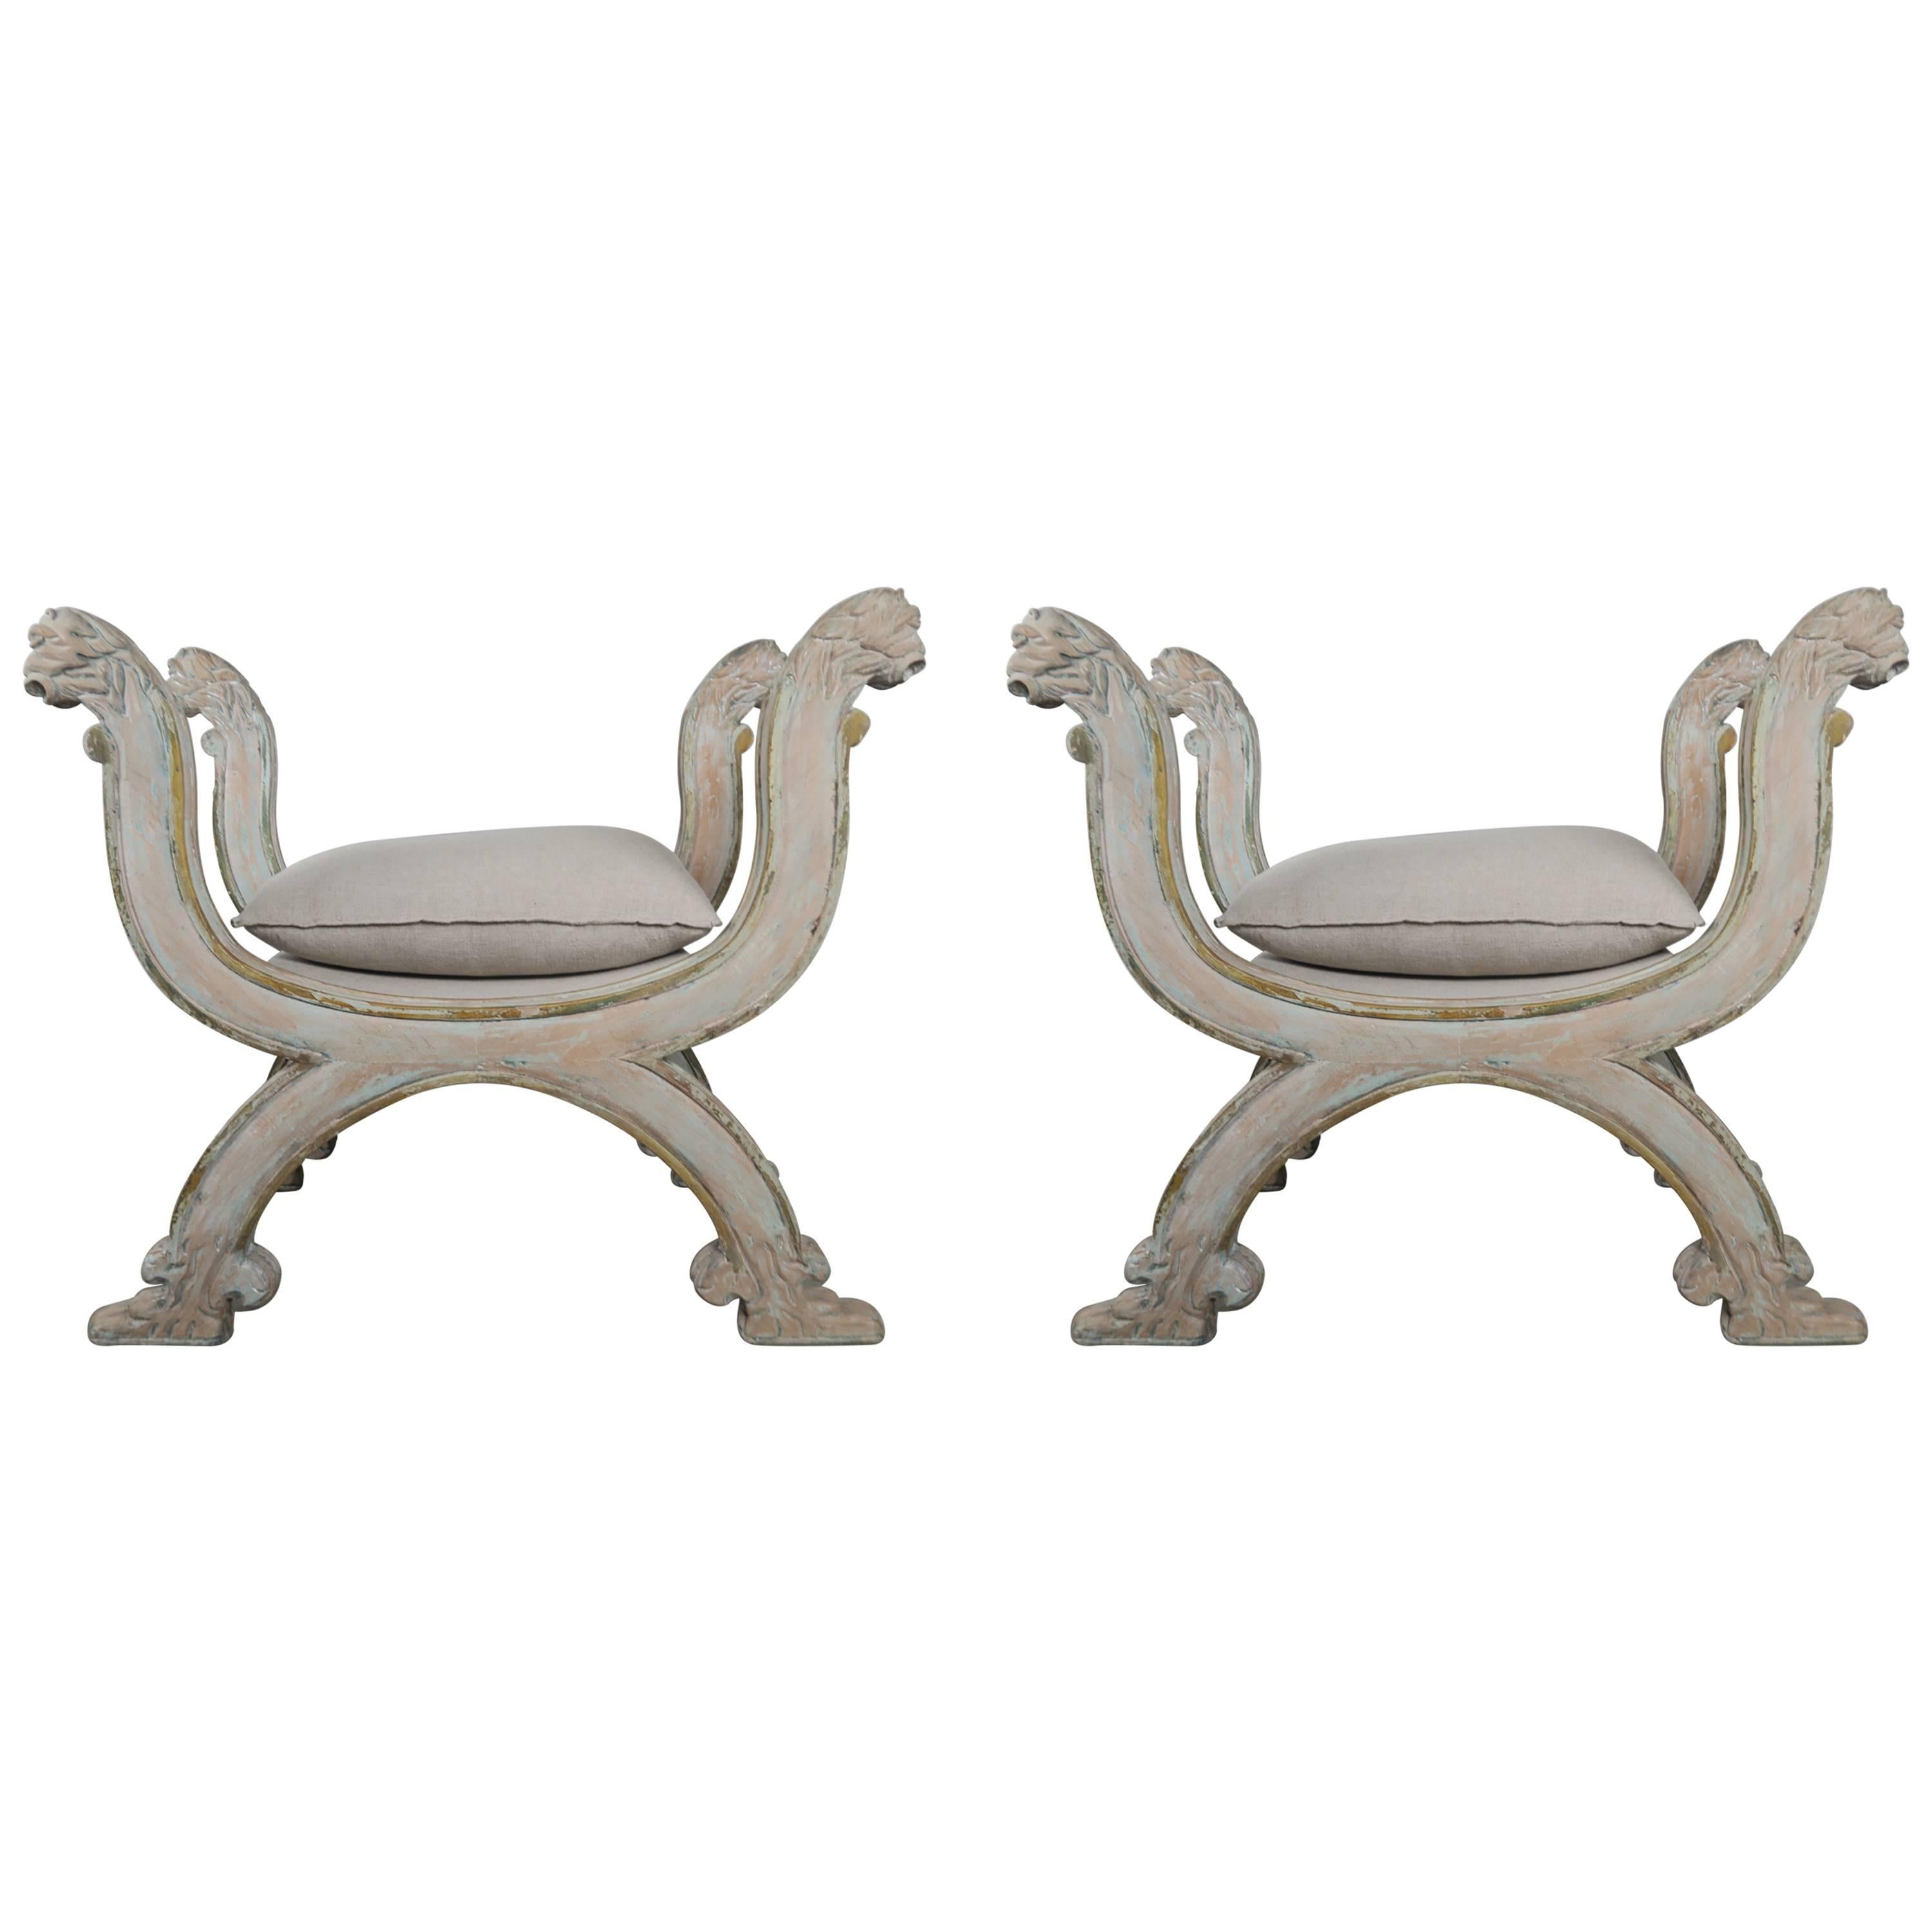 Pair of Lion Regency Style "X" Benches with Linen Seats